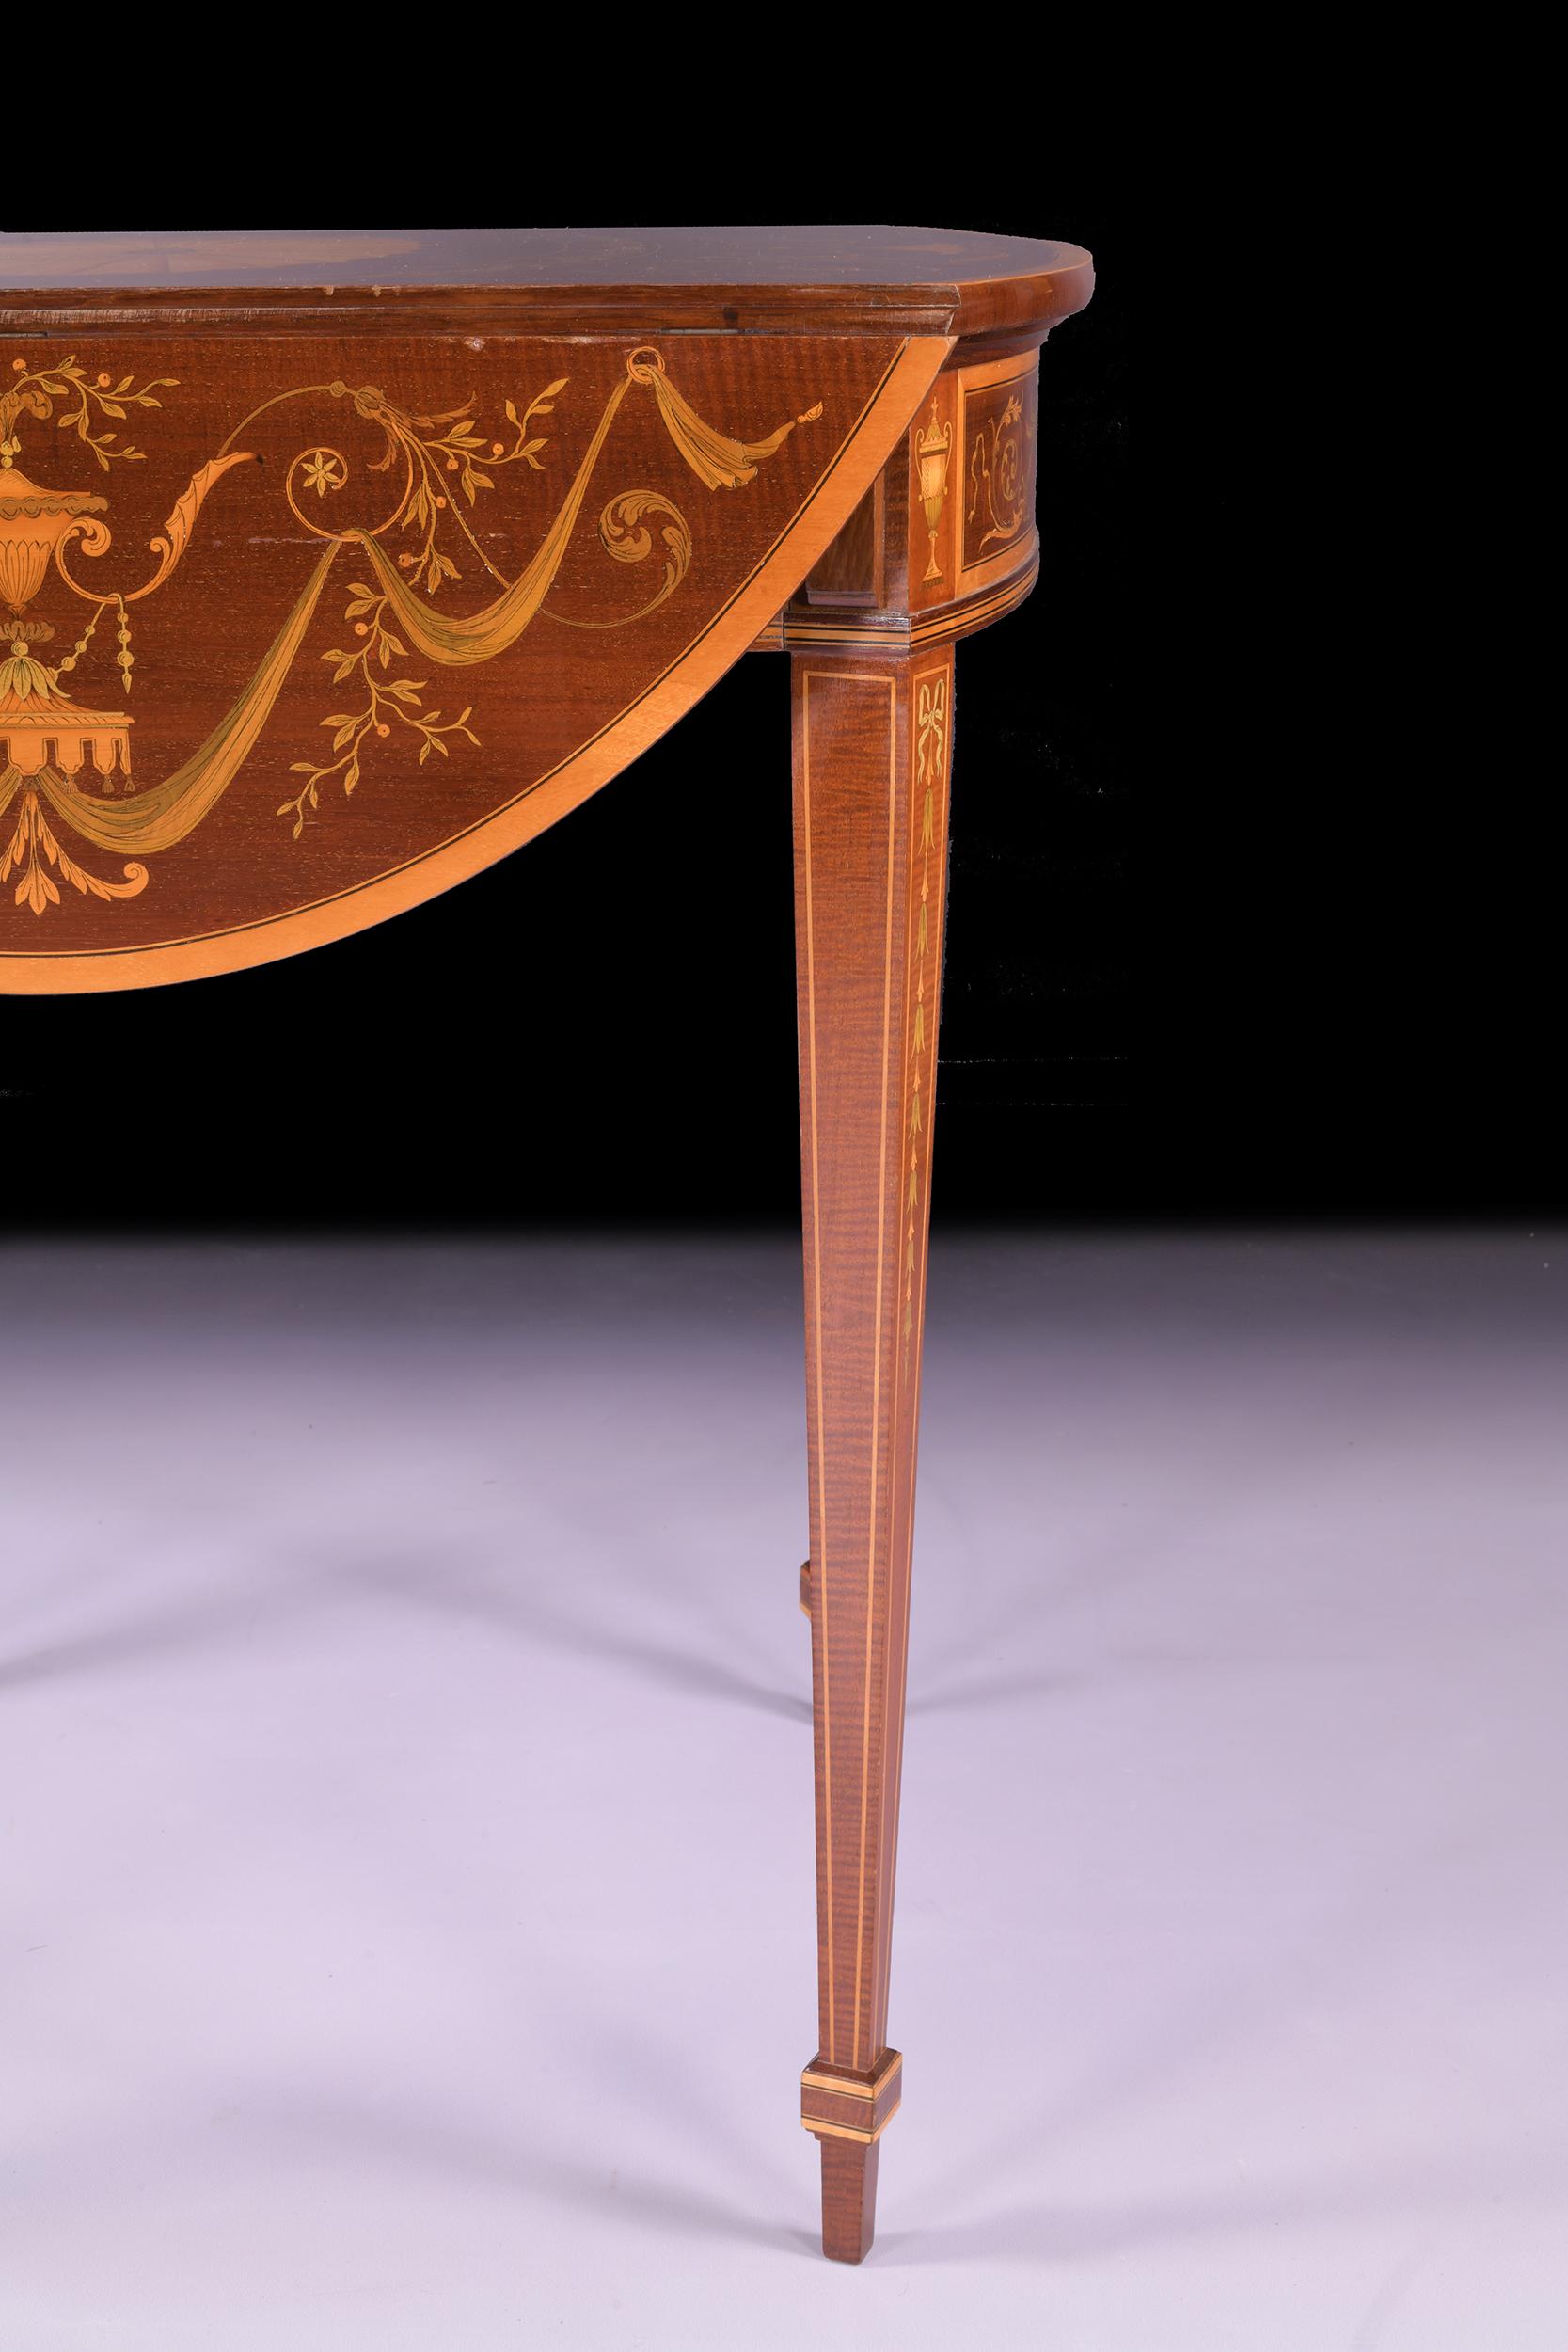 Late 19th Century English Edwardian Satinwood Pembroke Table By Edwards & Robert For Sale 3